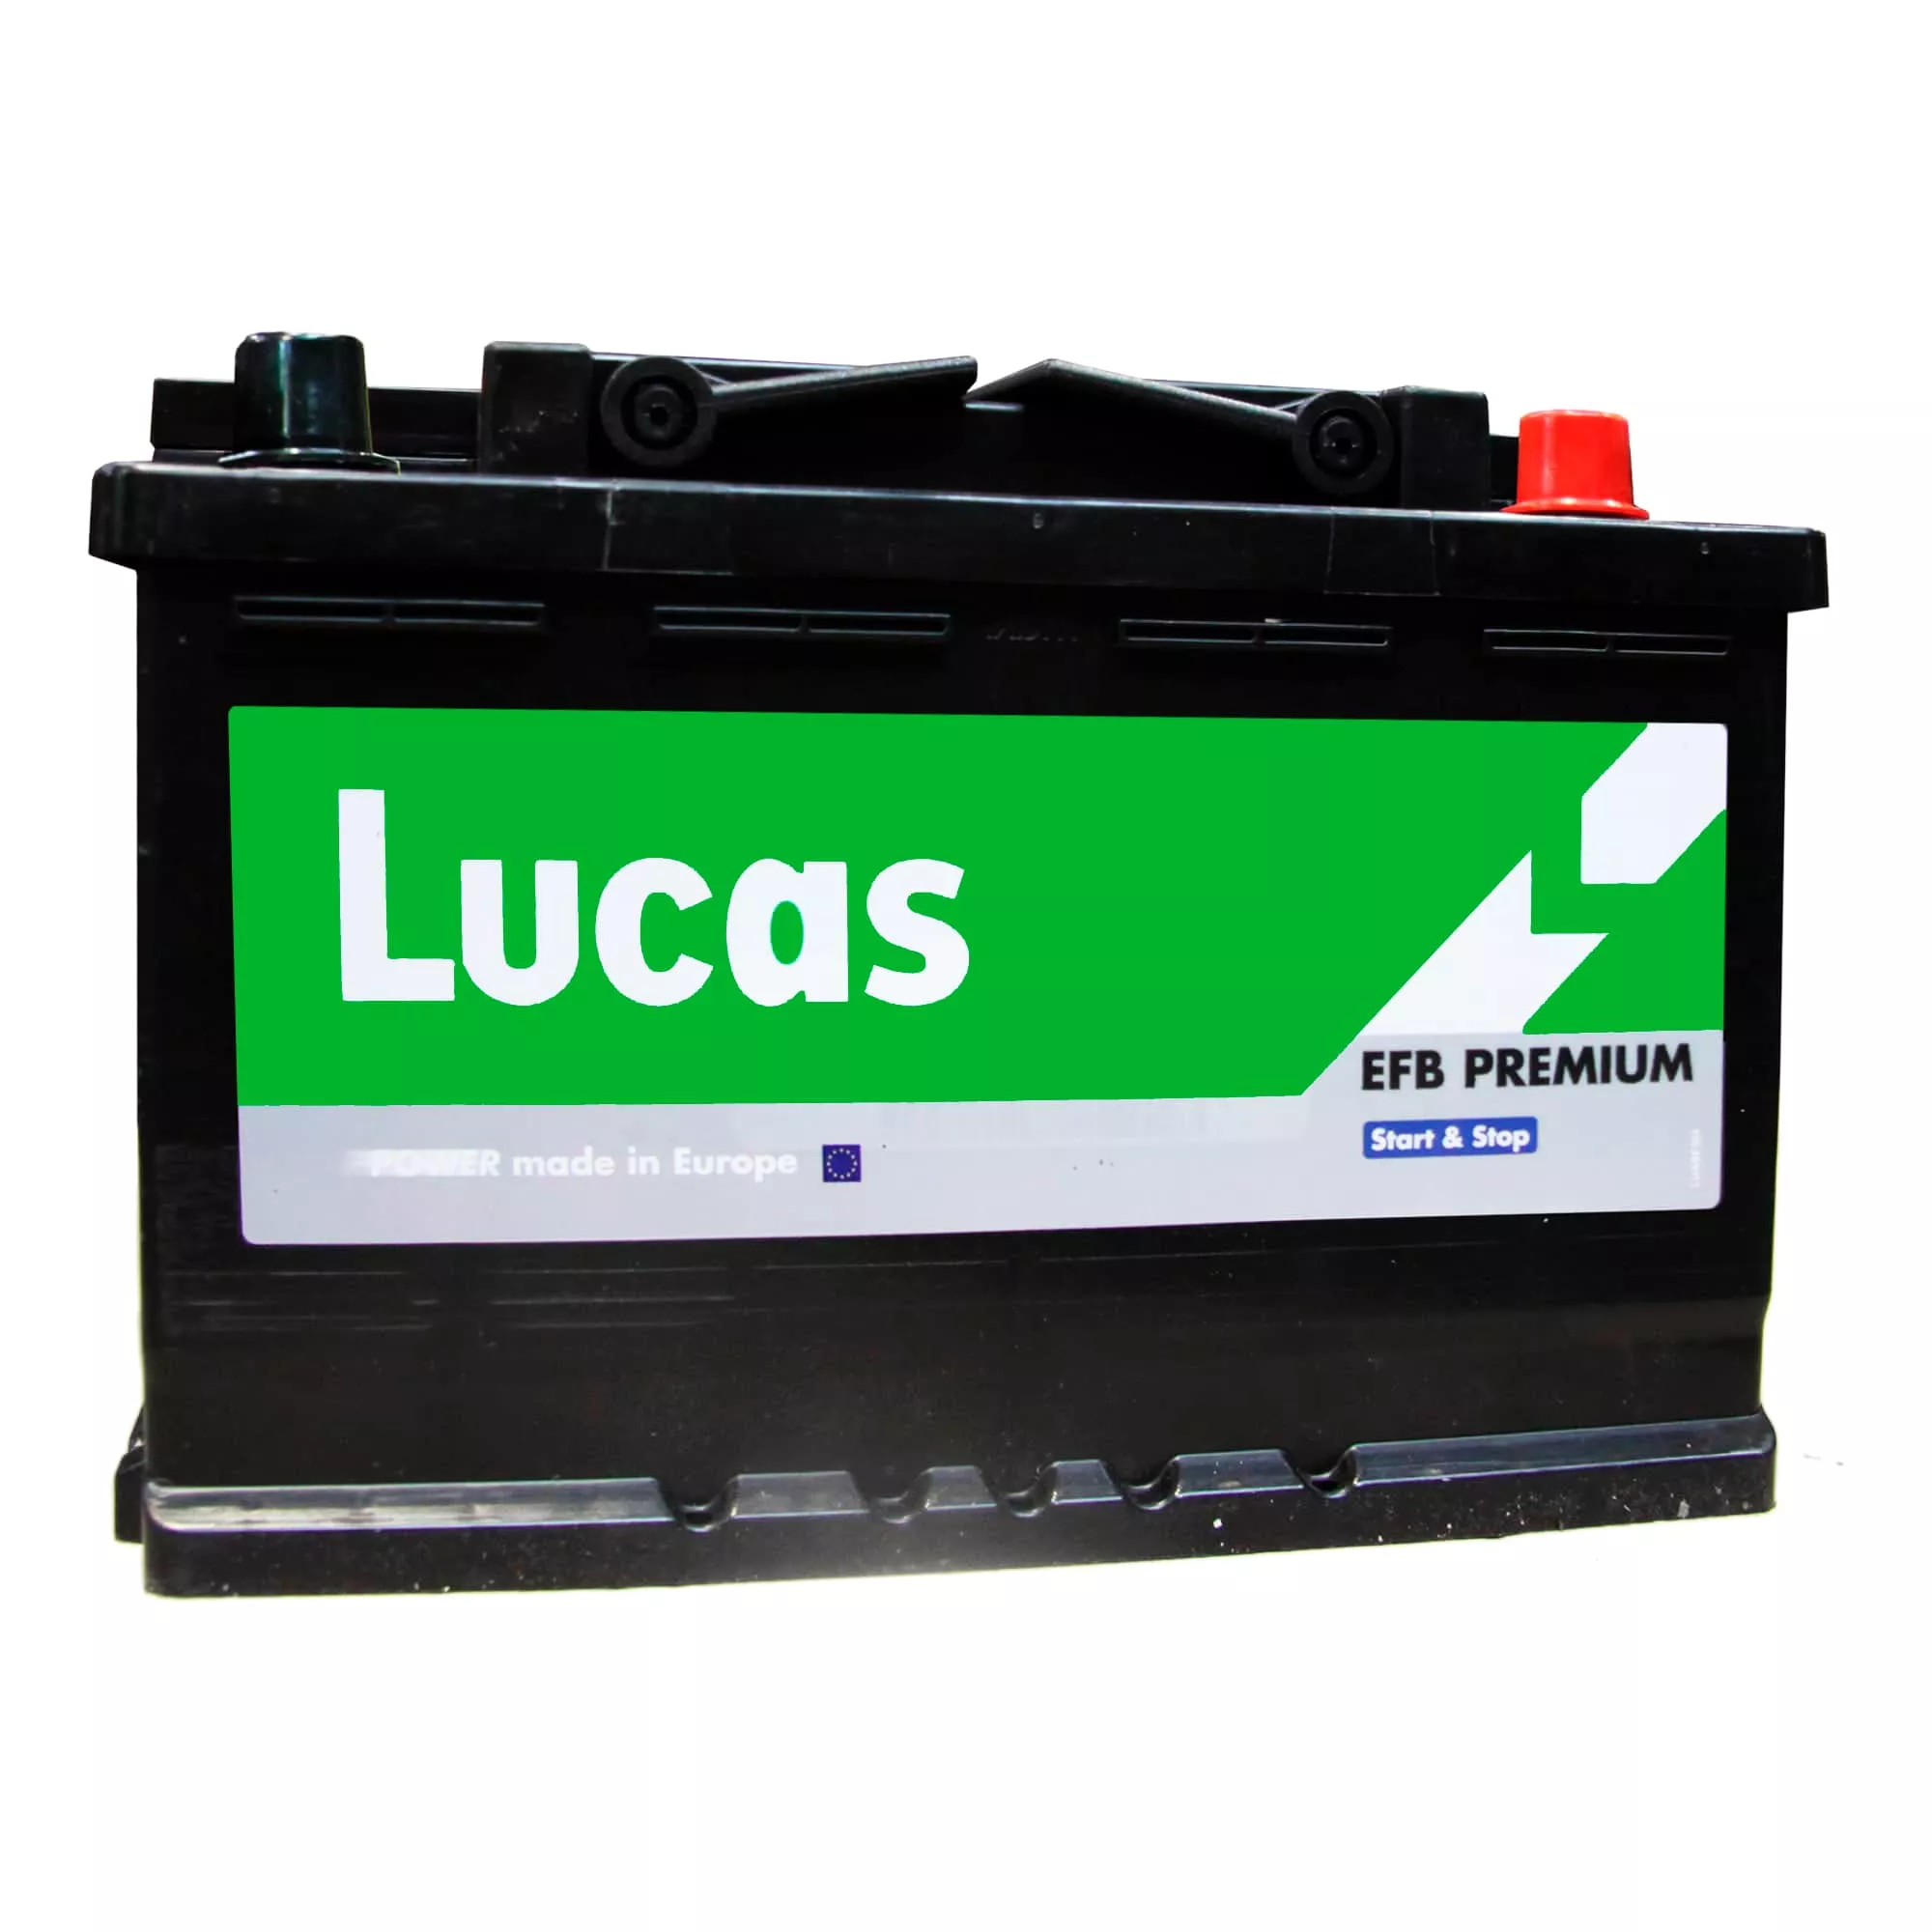 Аккумулятор Lucas (Batteries manufactured by Exide in Spain) 6CT-70 АзЕ EFB Start-Stop (LBEFB003A)